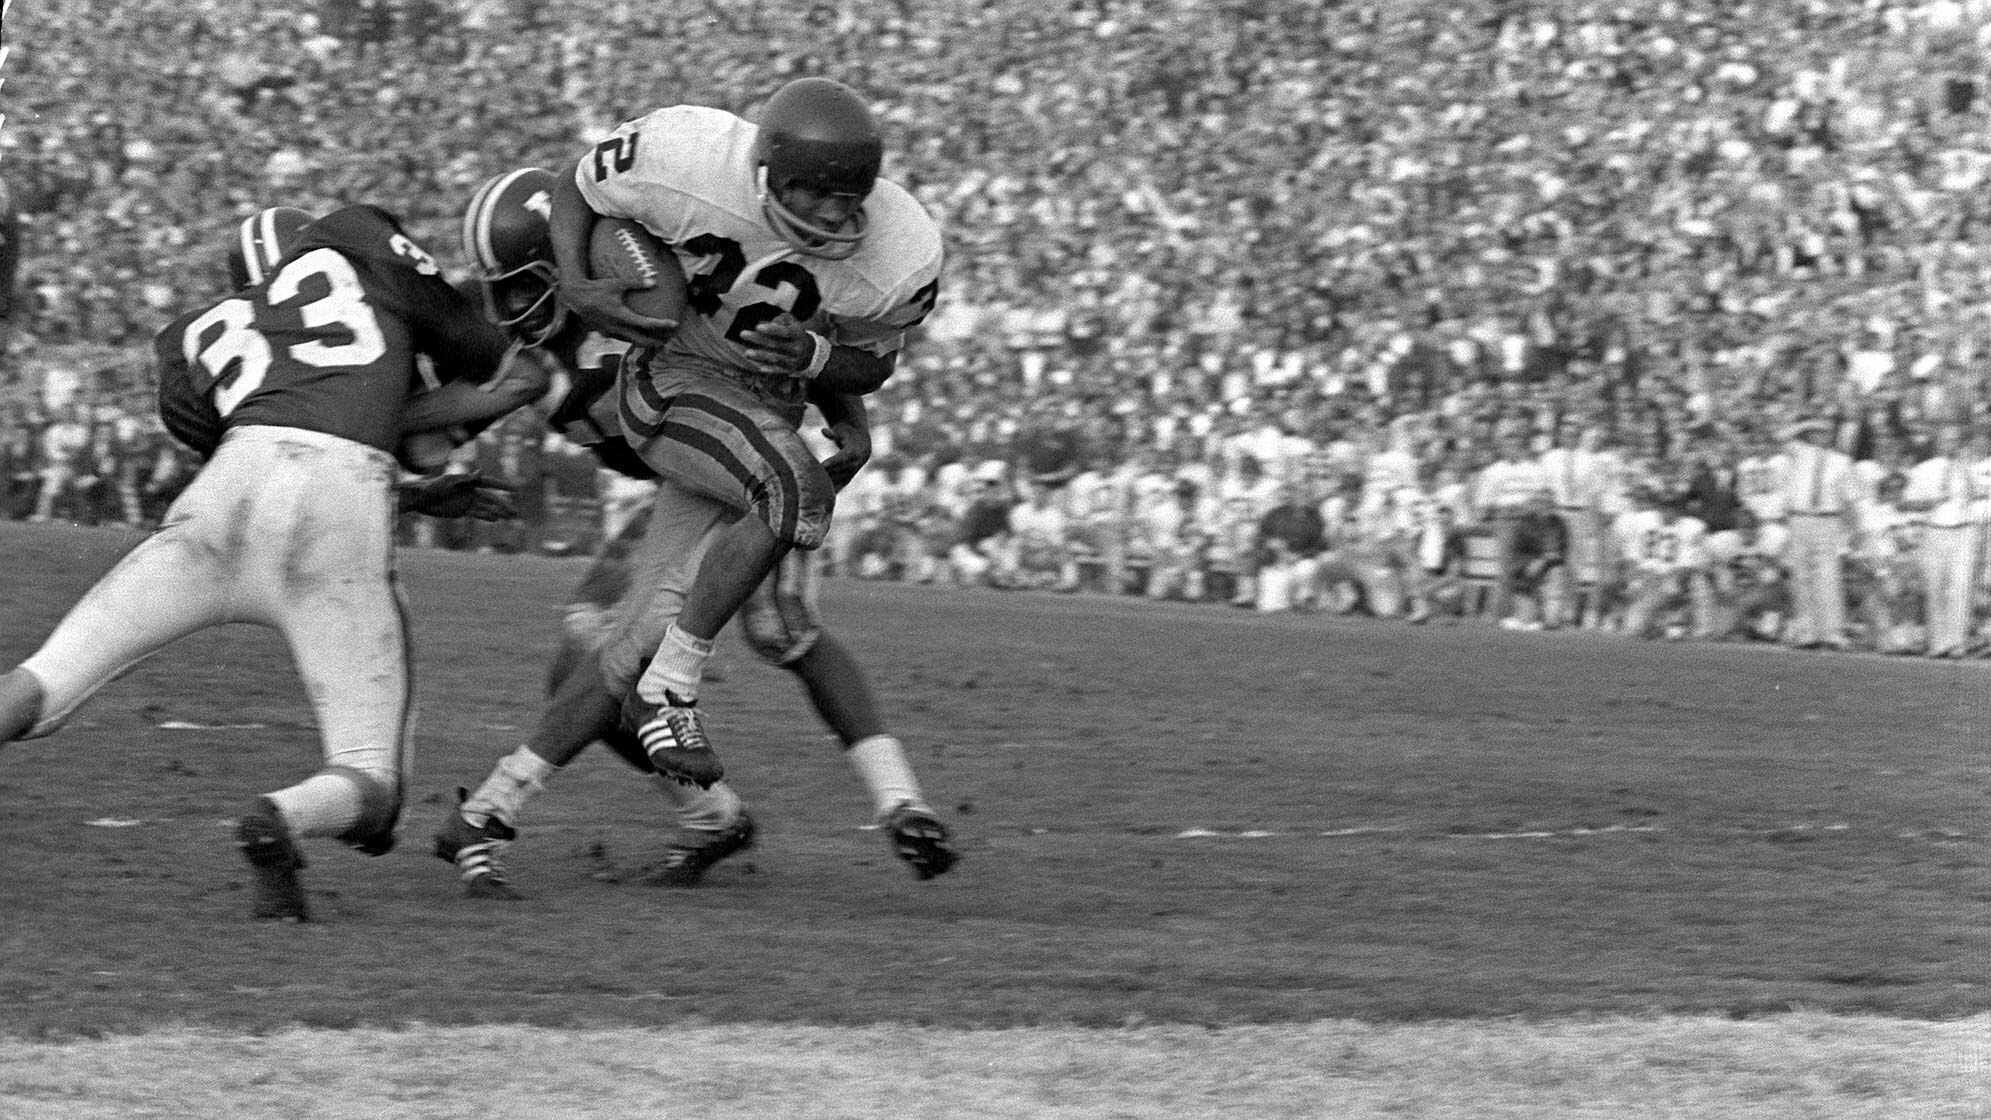 Greatest college football player of all time: Vote for the best ever